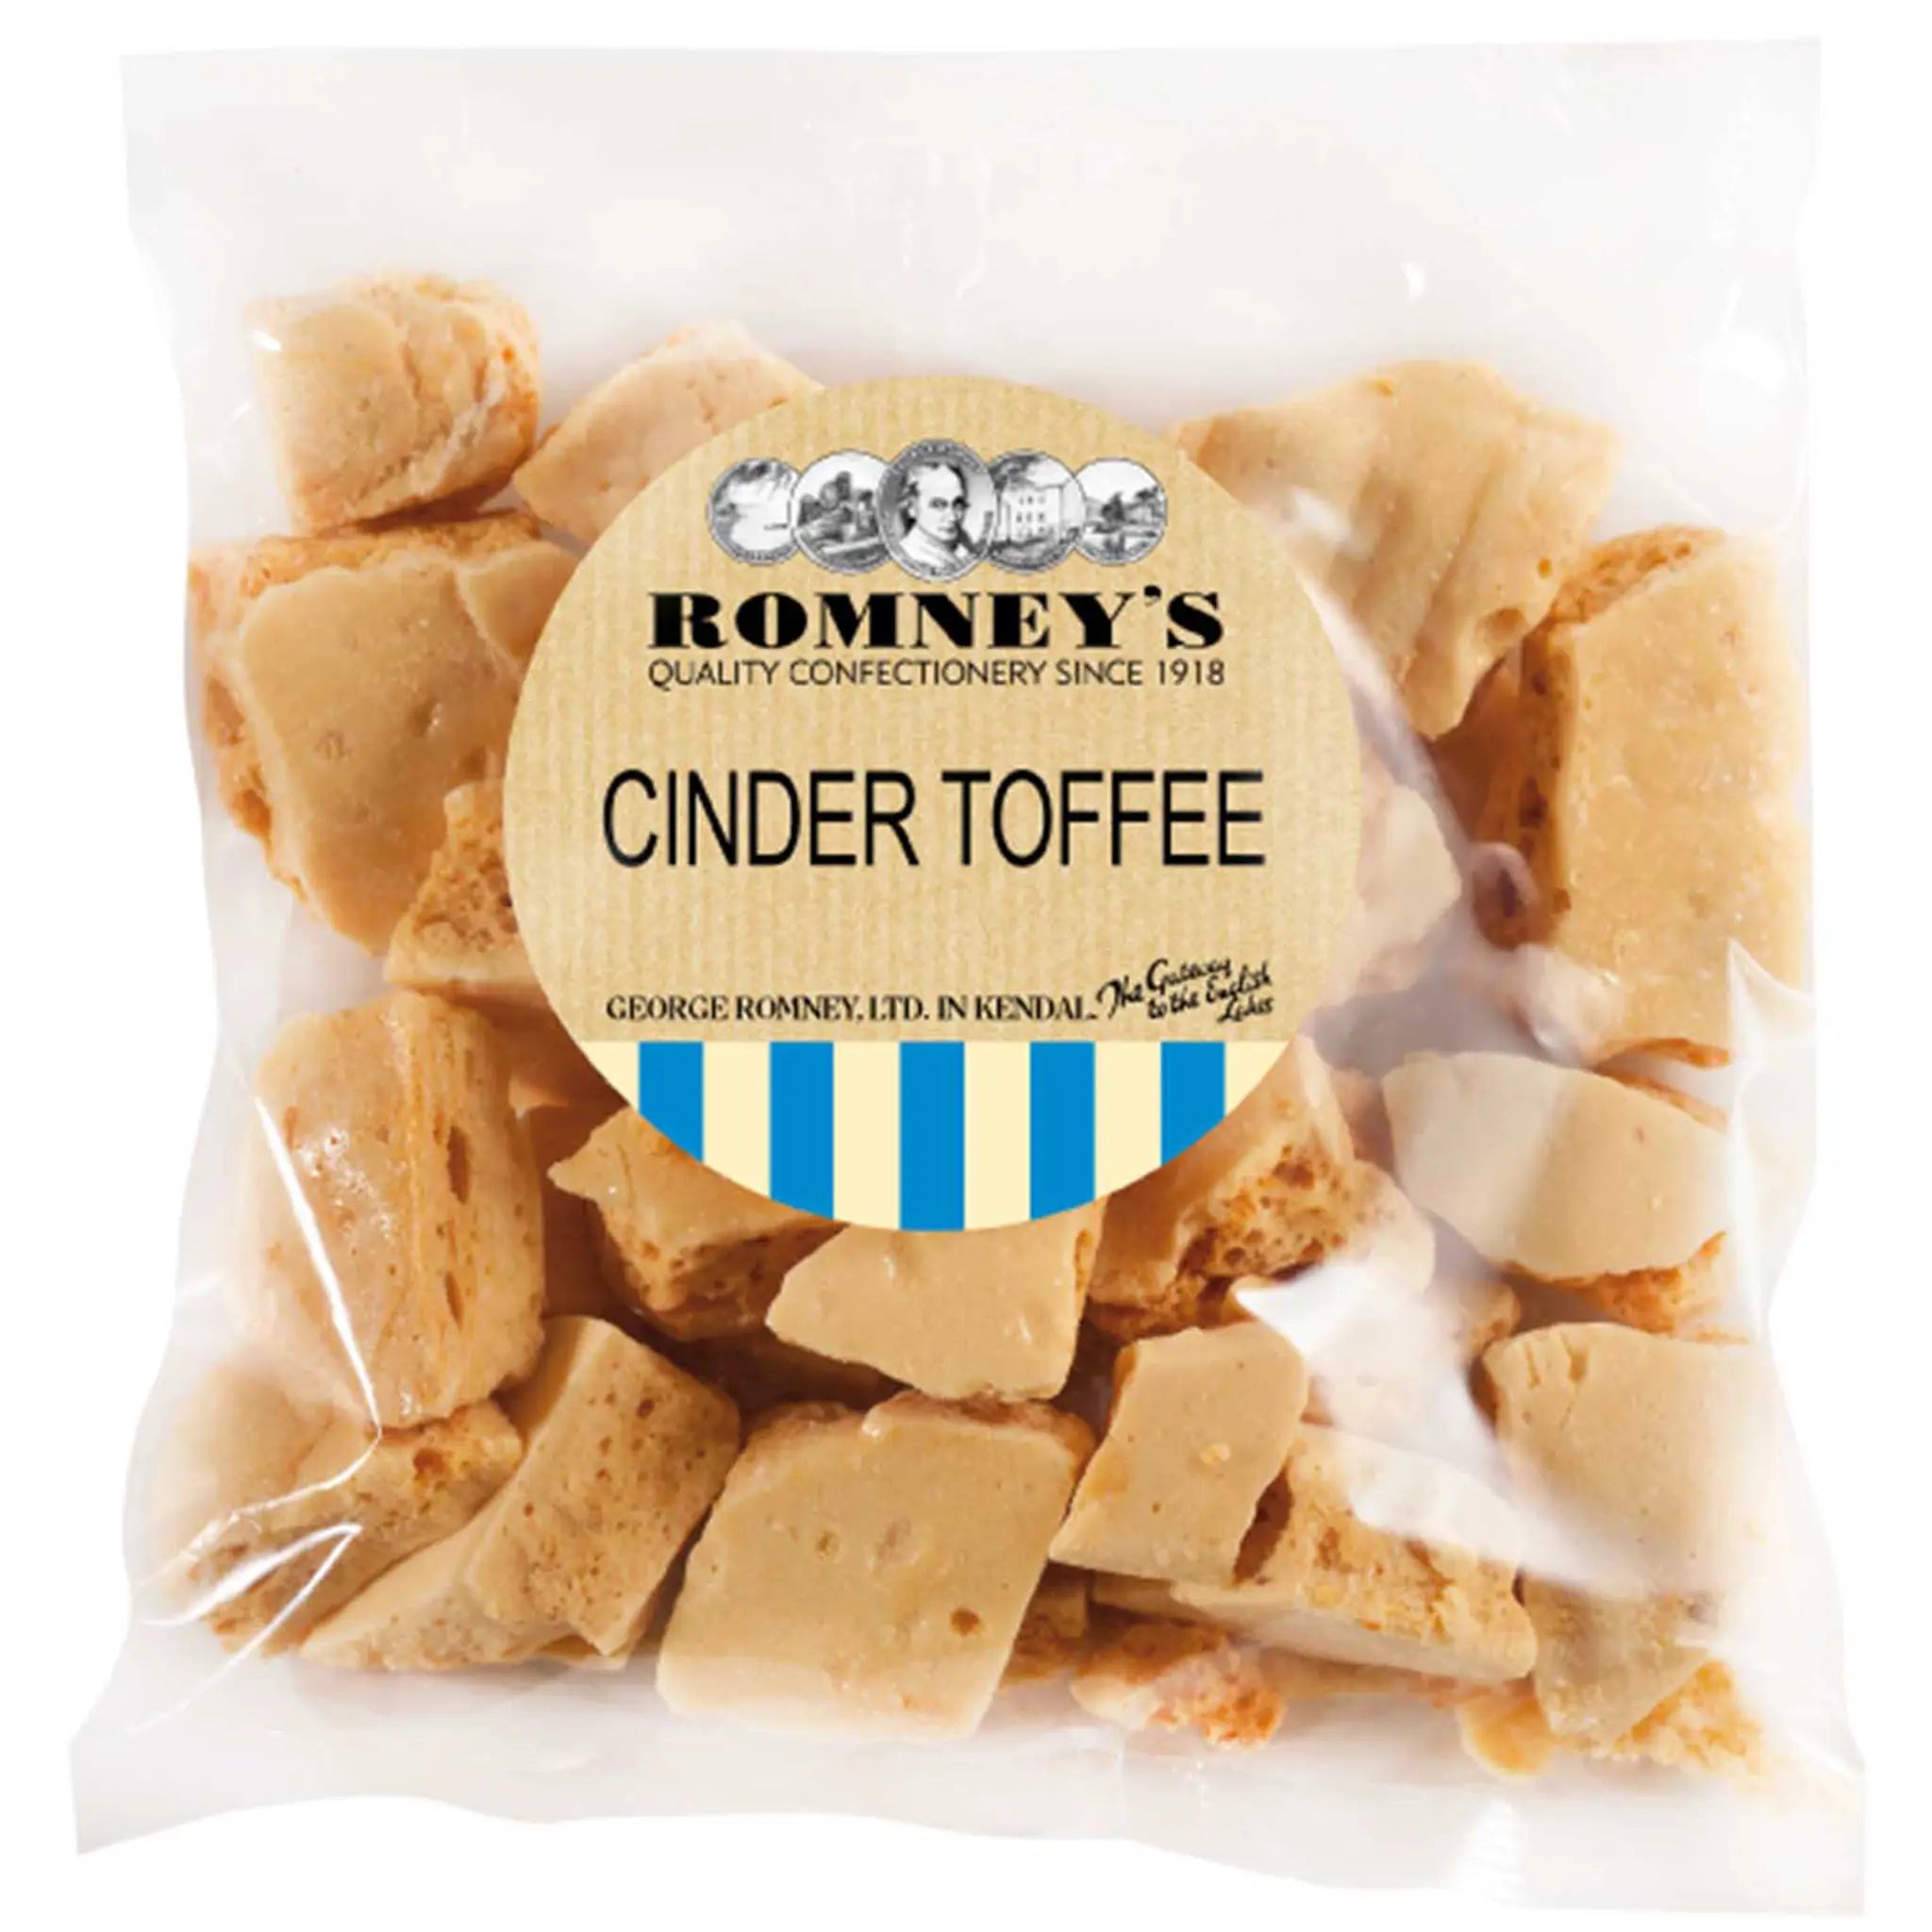 Everton Toffee (5) 4oz Bags of Butter Tofee Pretzels - QVC.com